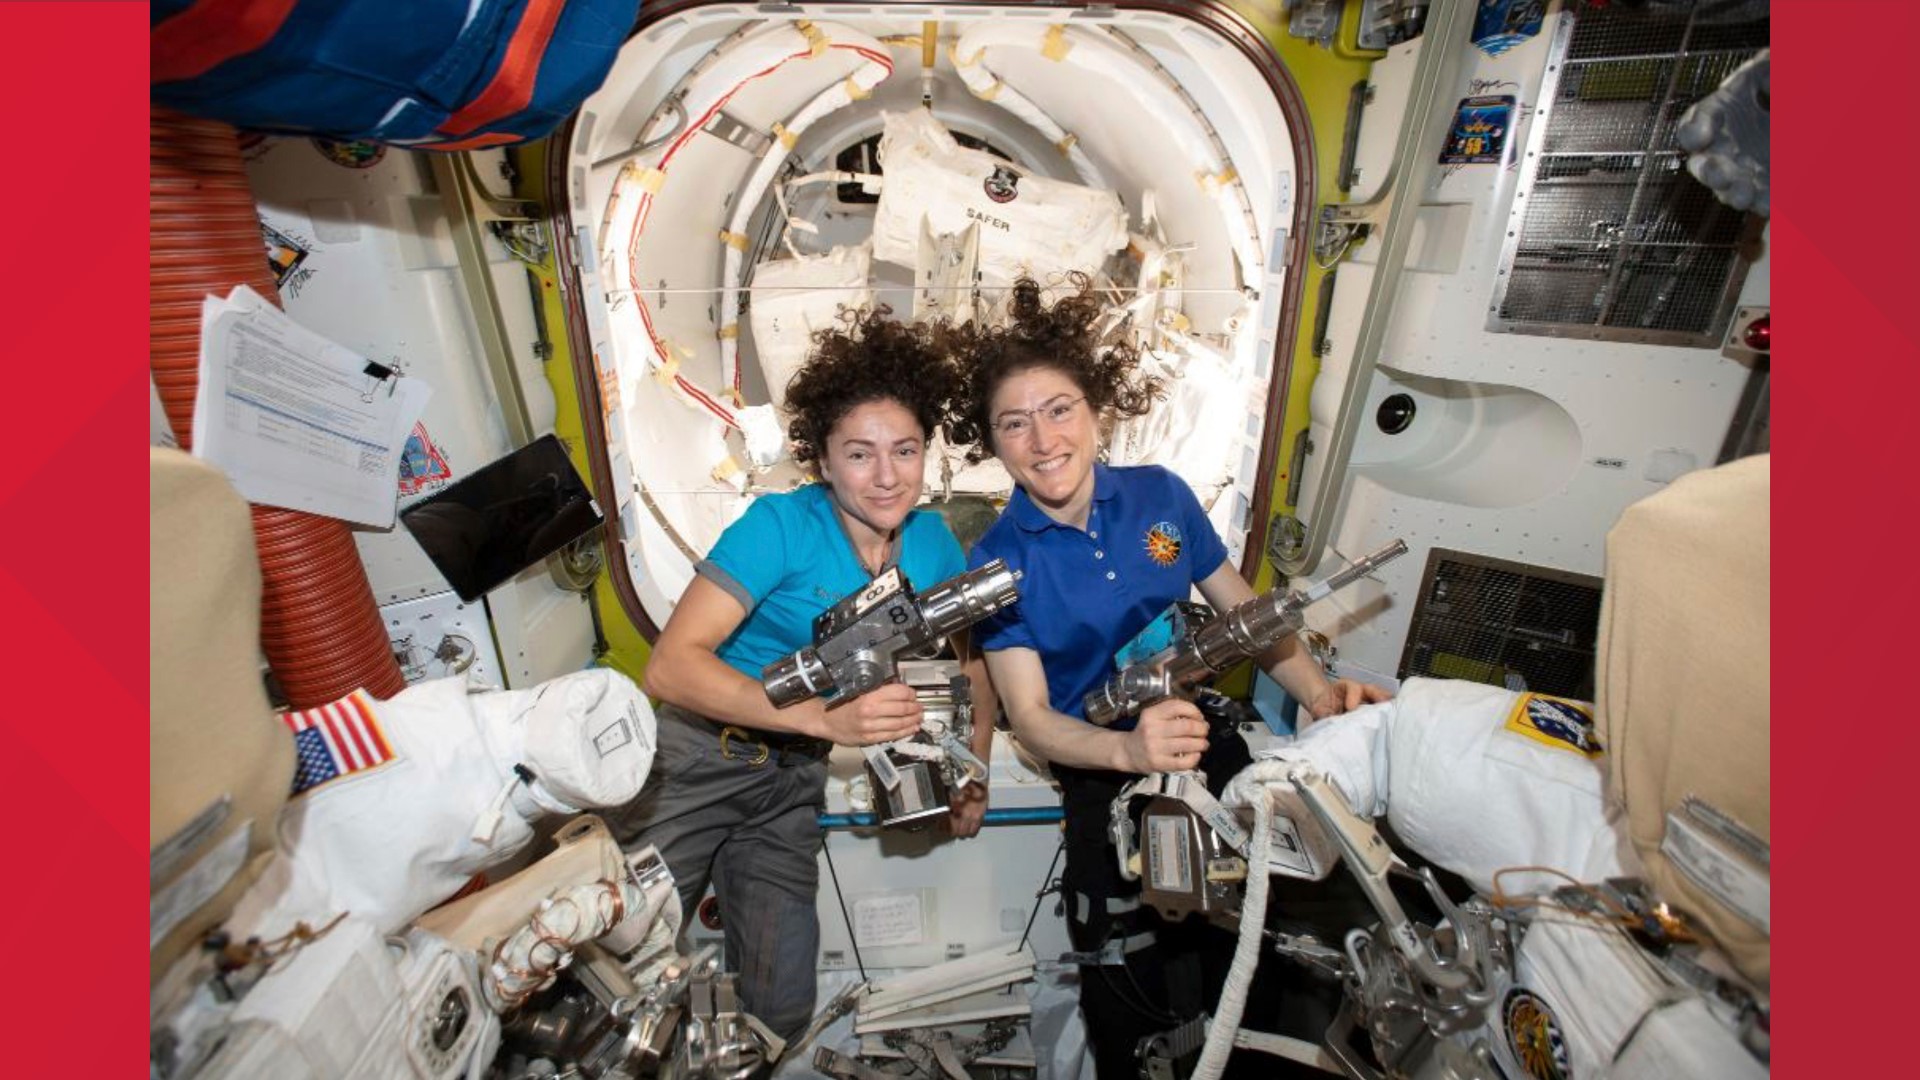 On Friday, astronauts Christina Koch and Jessica Meir ventured outside the International Space Station for spacewalk 421, the first spacewalk ever without a male.